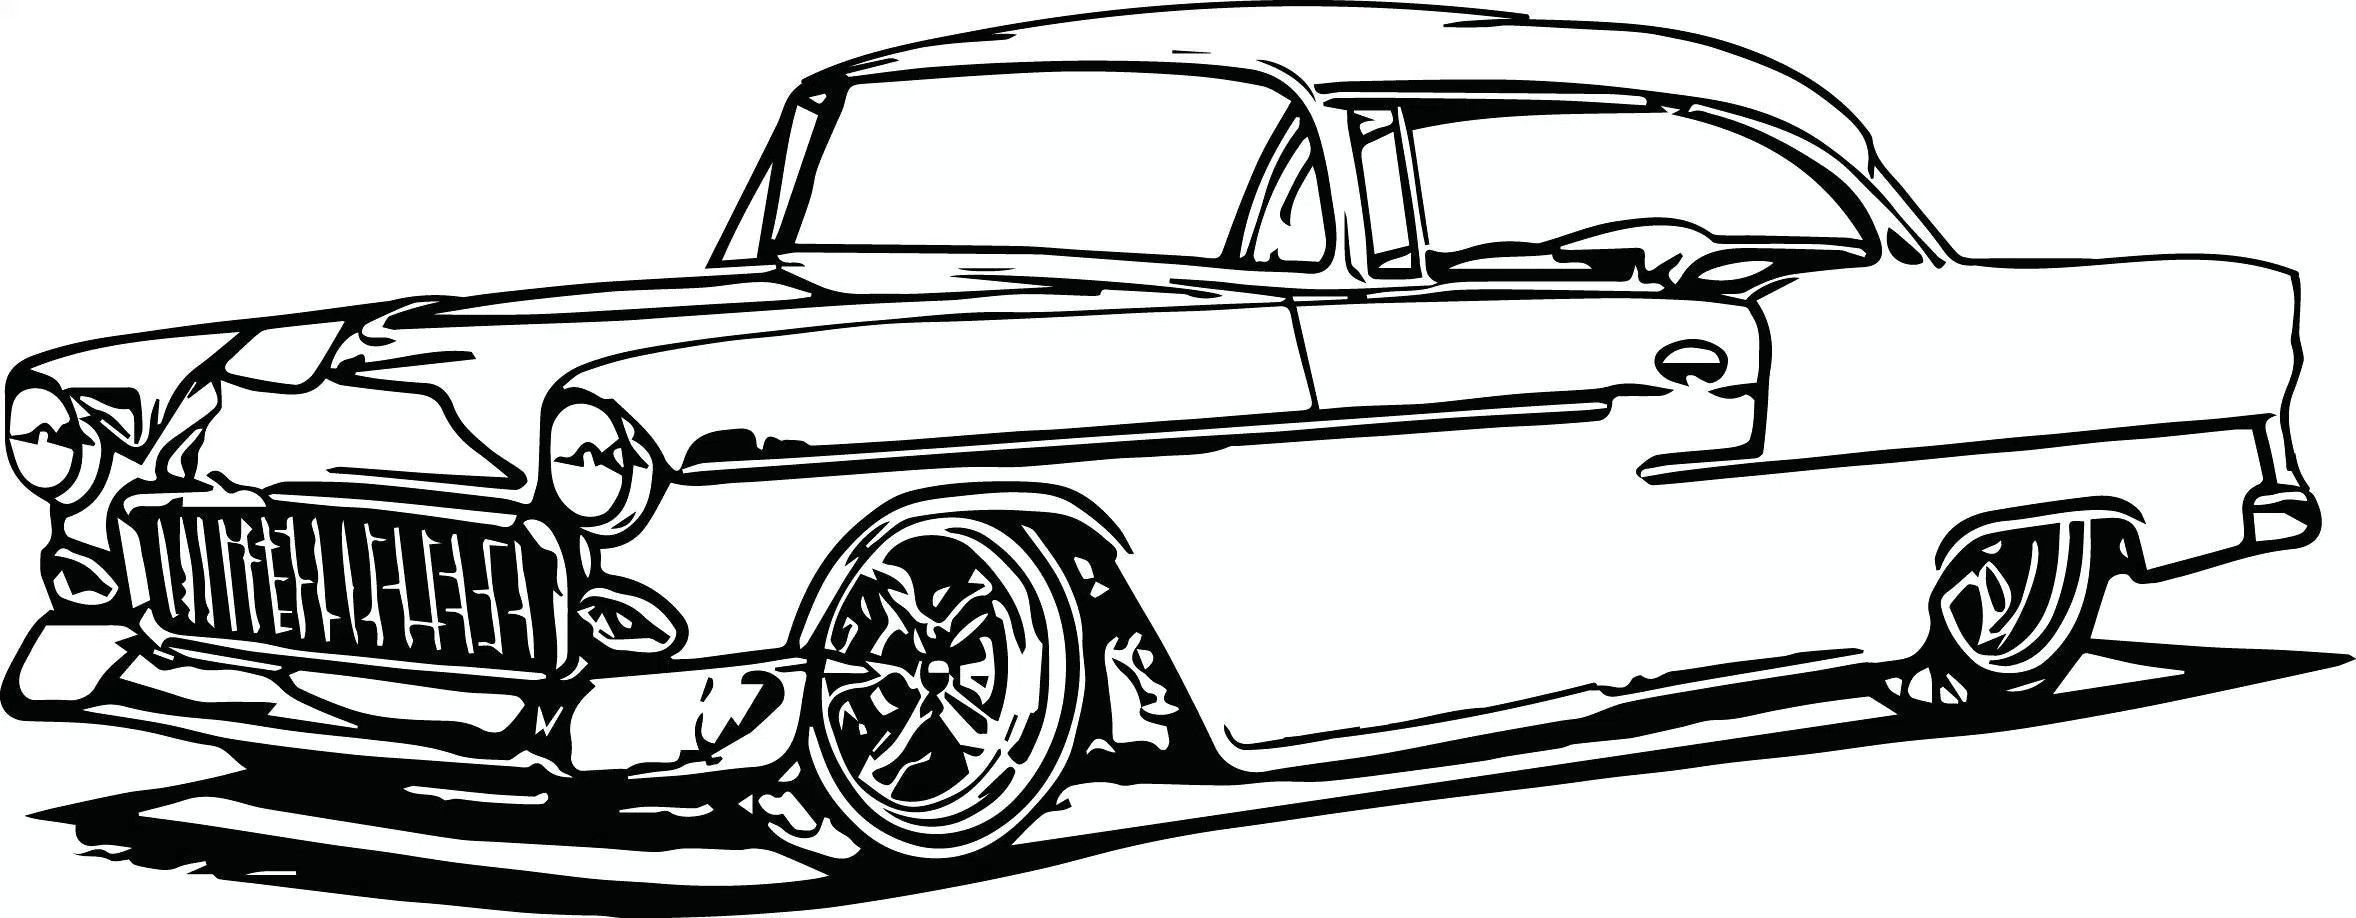 Muscle car coloring pages coloring pages printable muscle car coloring pages creative free